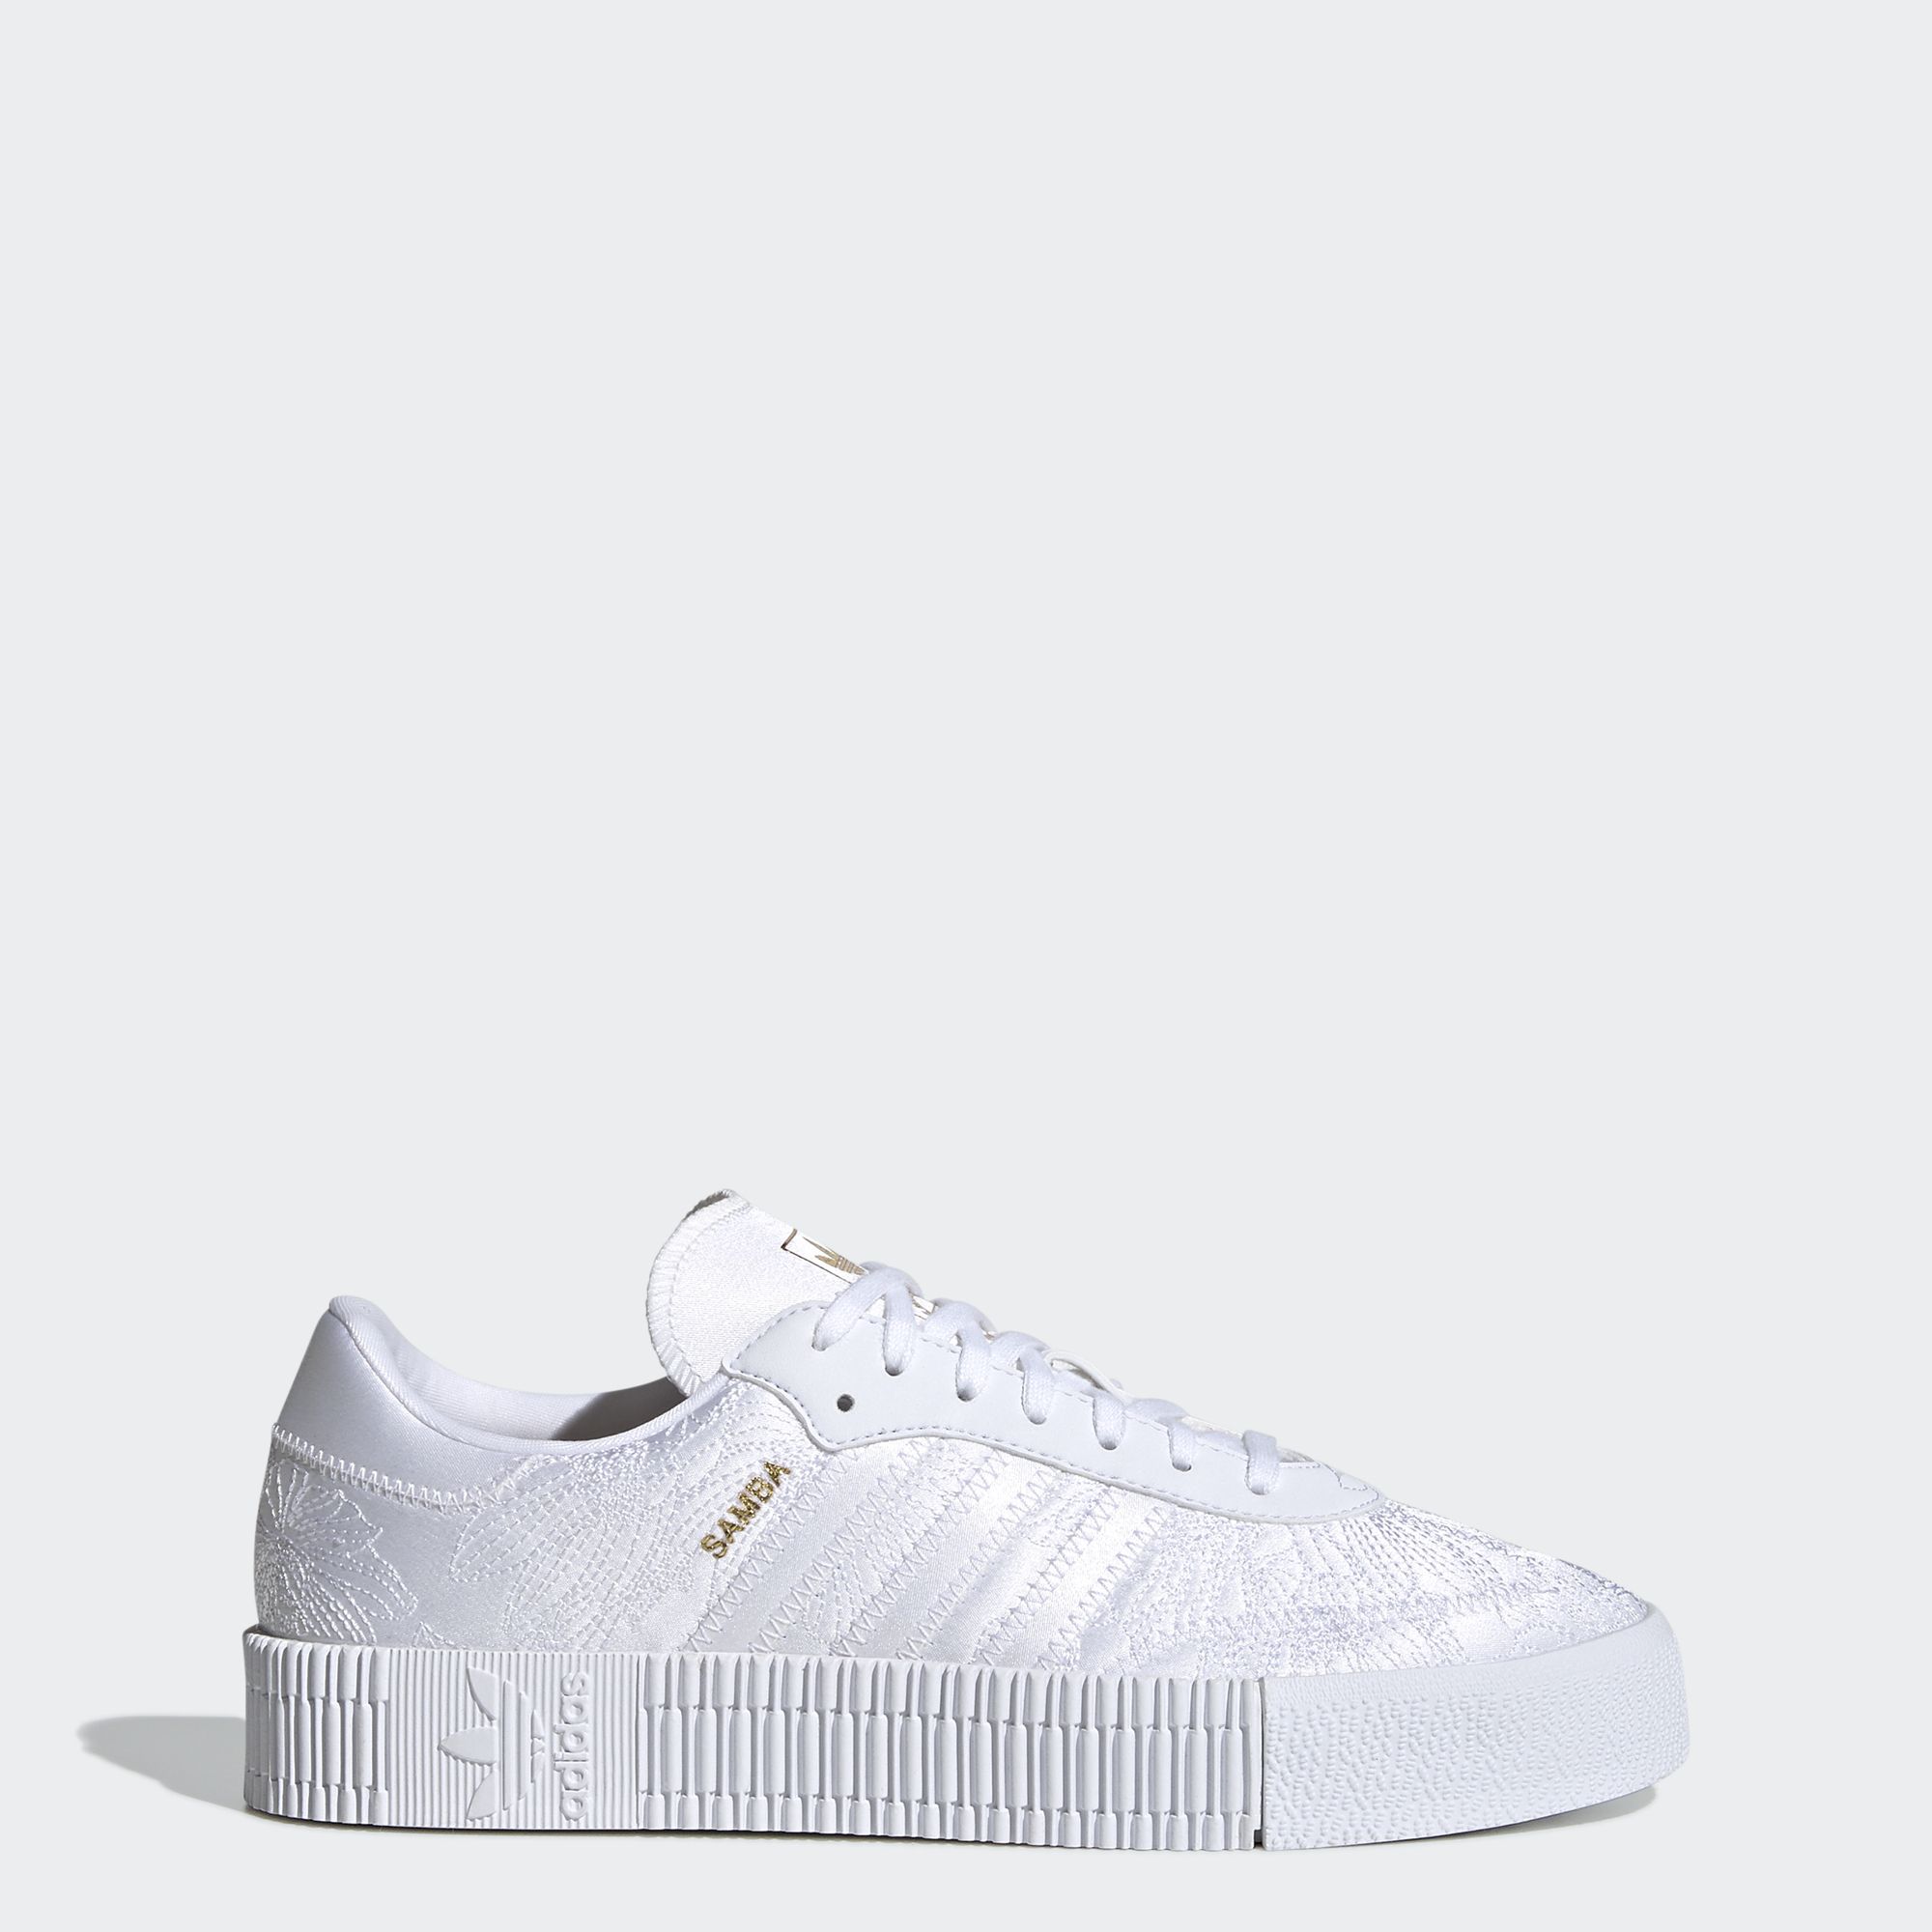 adidas white shoes online